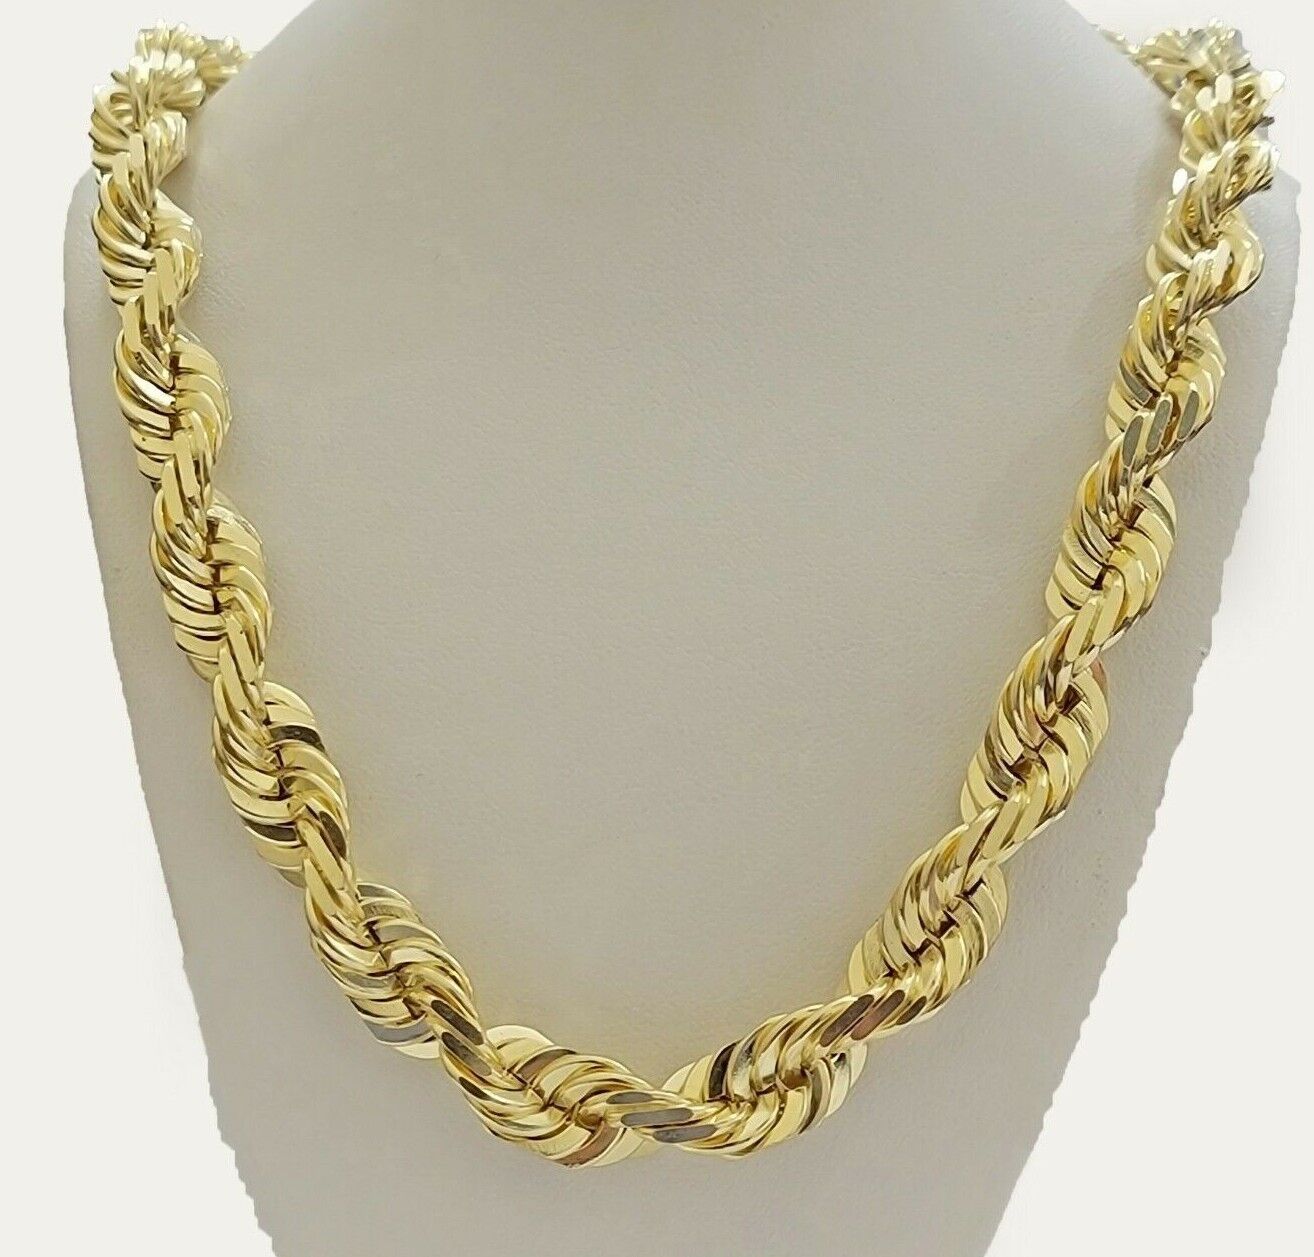 14mm Solid 10k Yellow Gold Rope Chain Necklace 28" Inch Mens Thick & Heavy Shiny